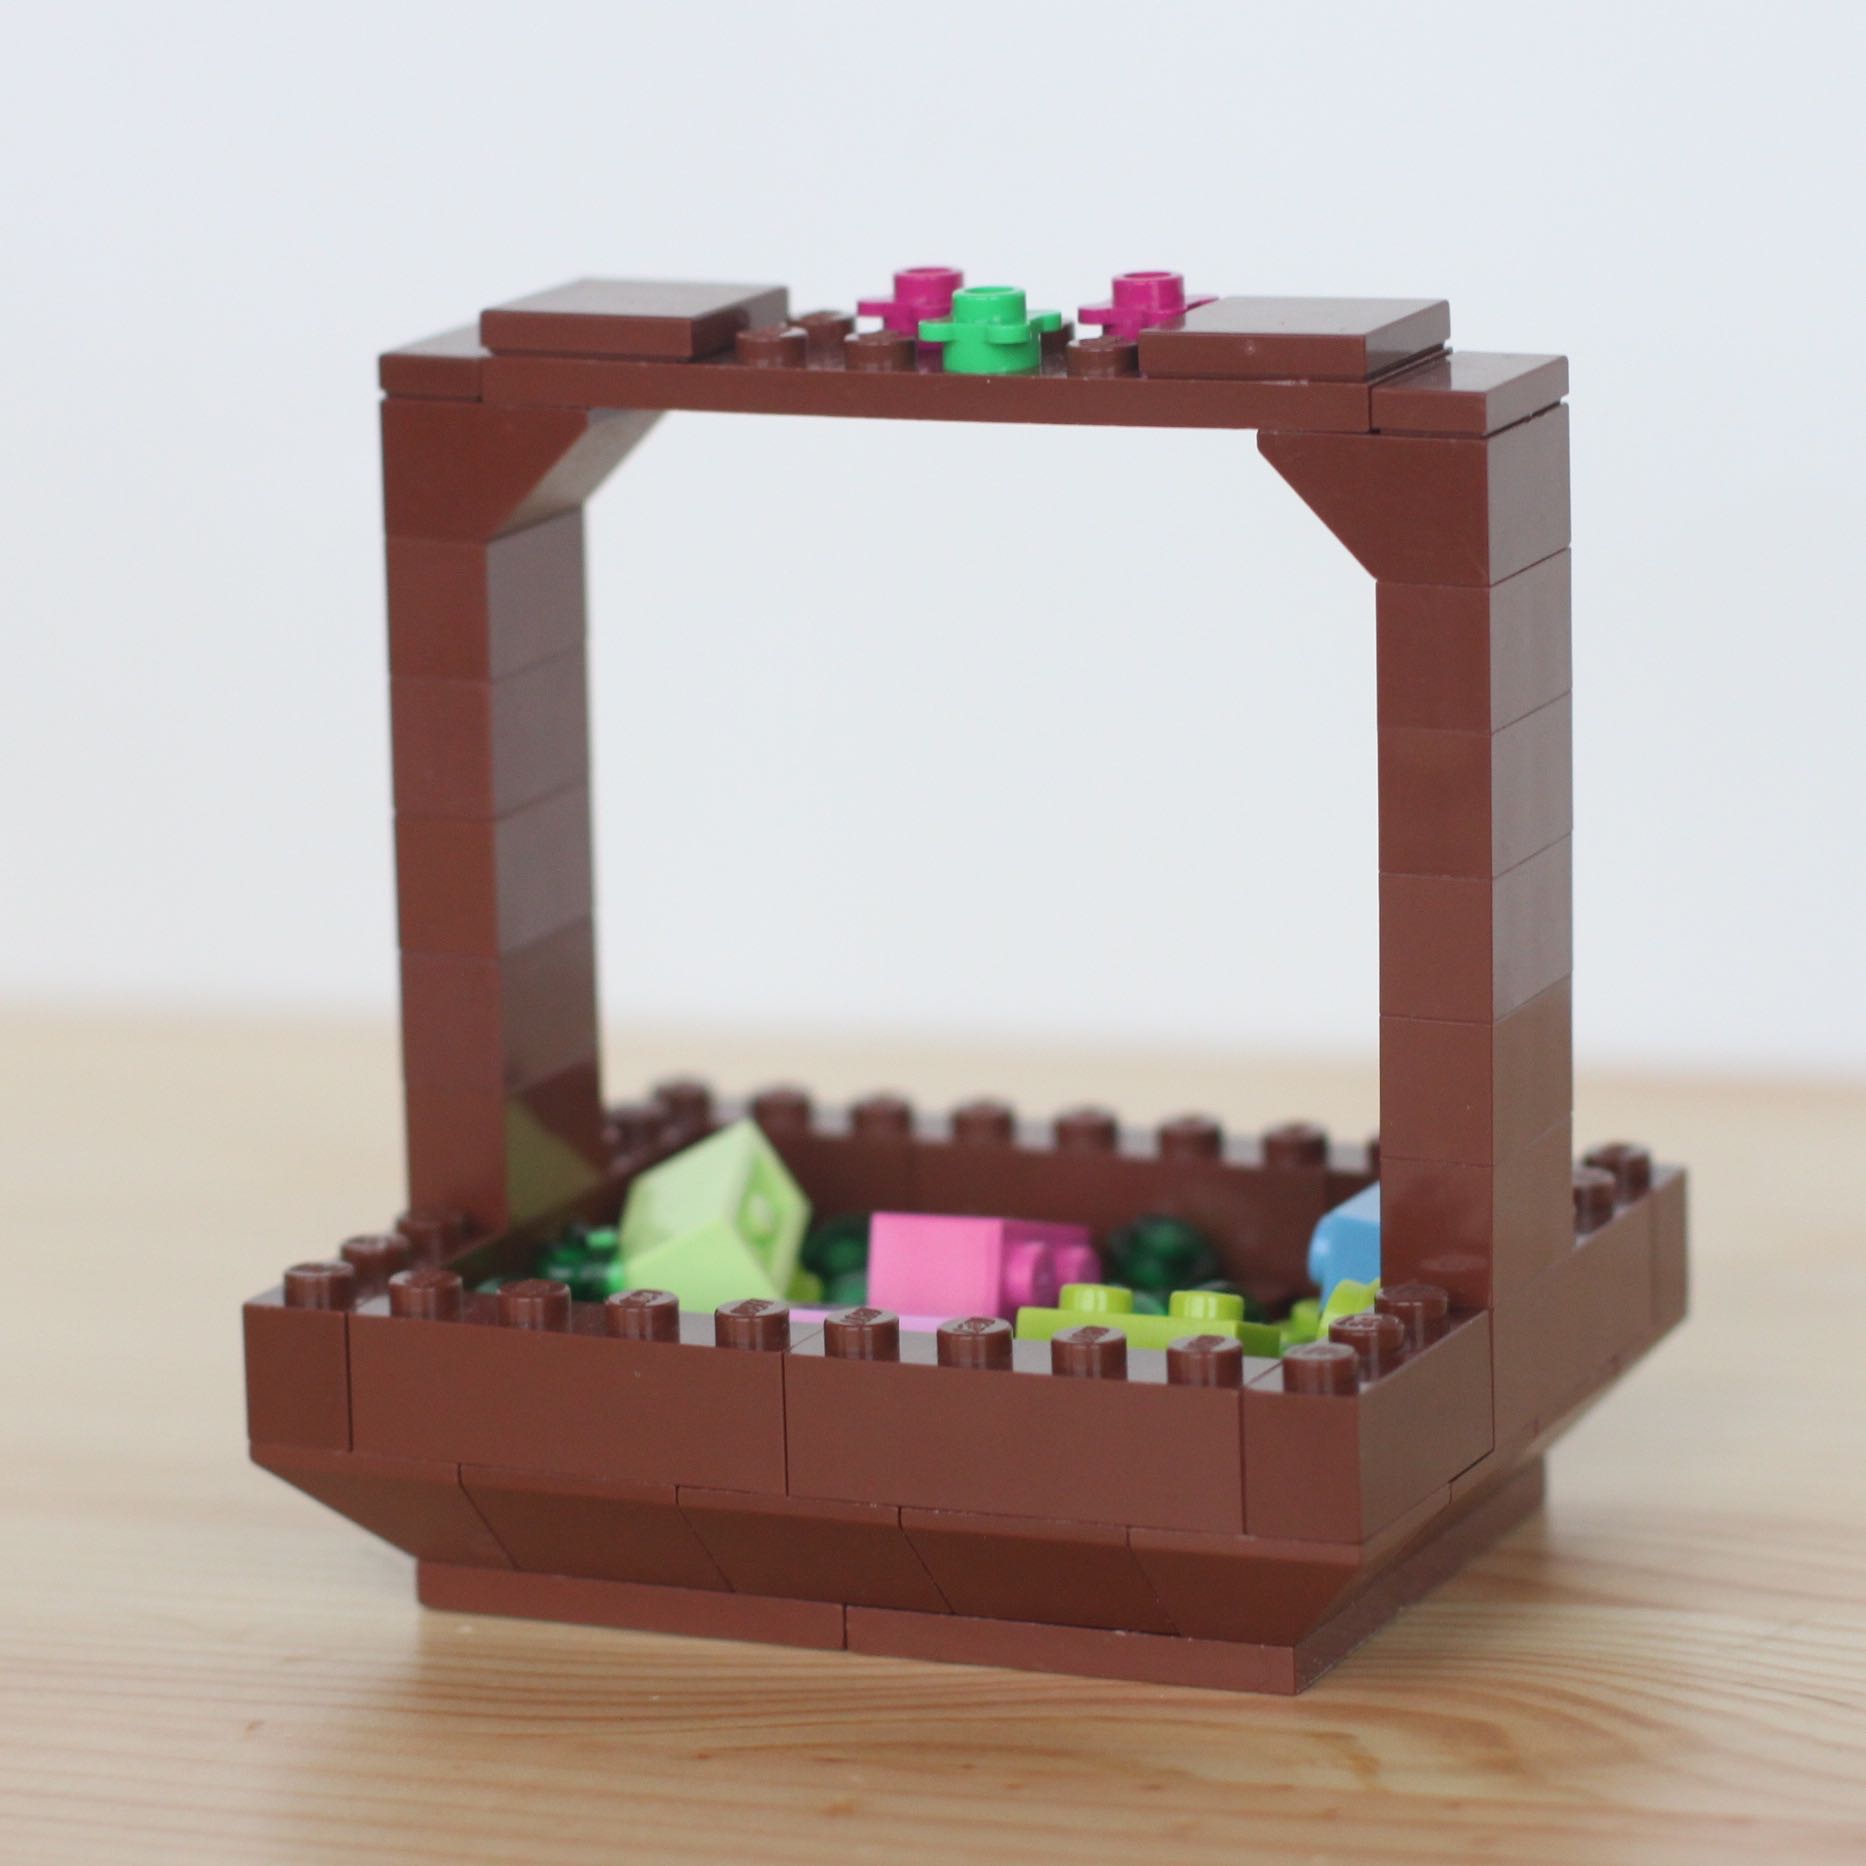 7 Spring Lego Projects to Build